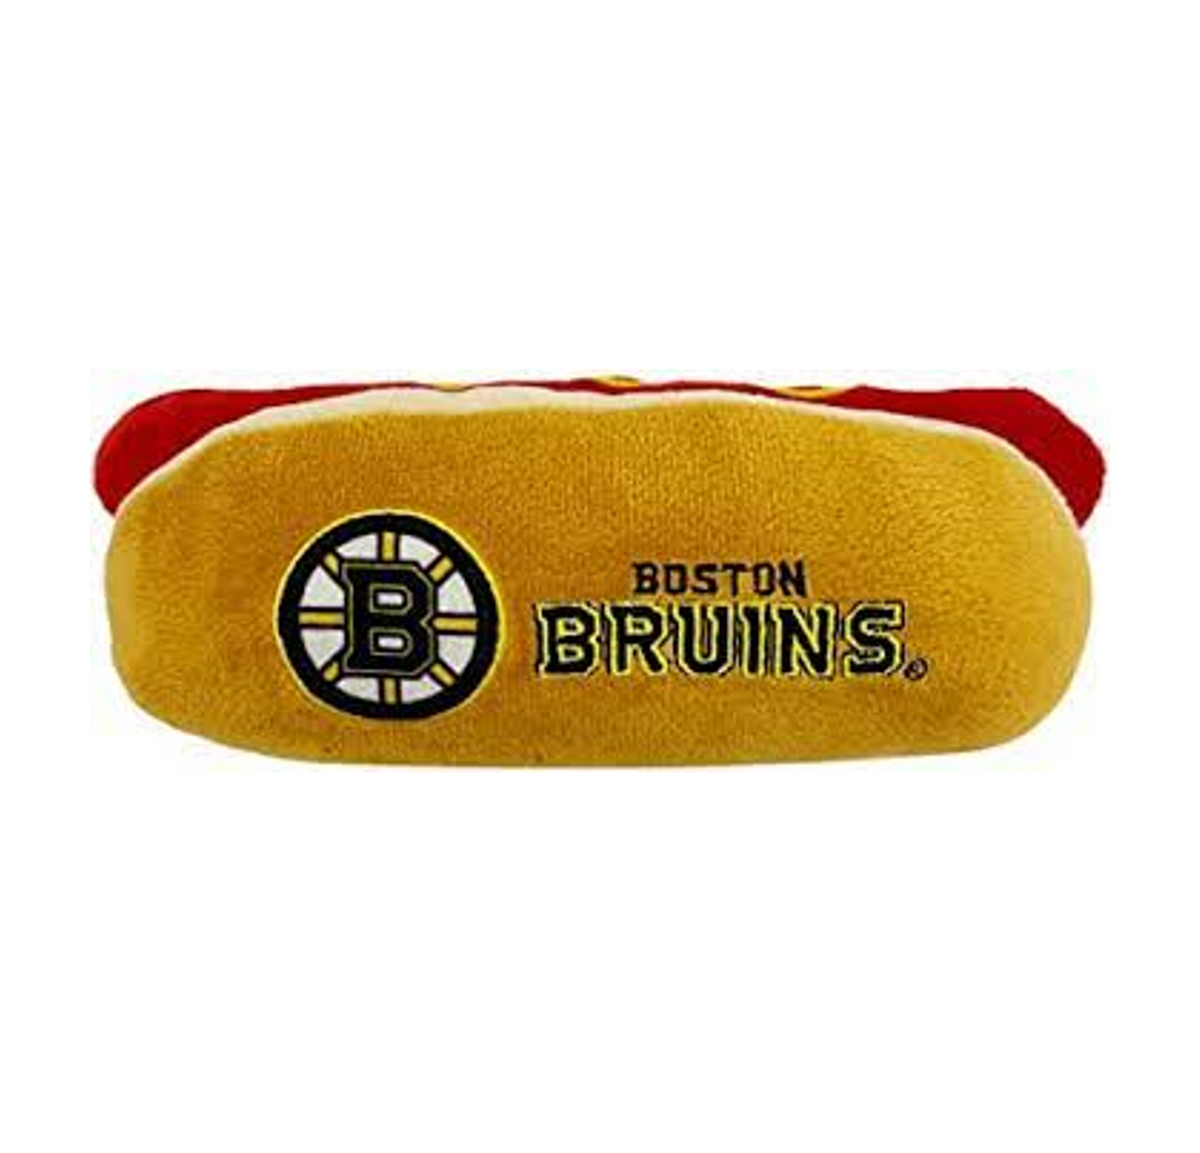 Boston Bruins Hot Dog Plush Toys - 3 Red Rovers